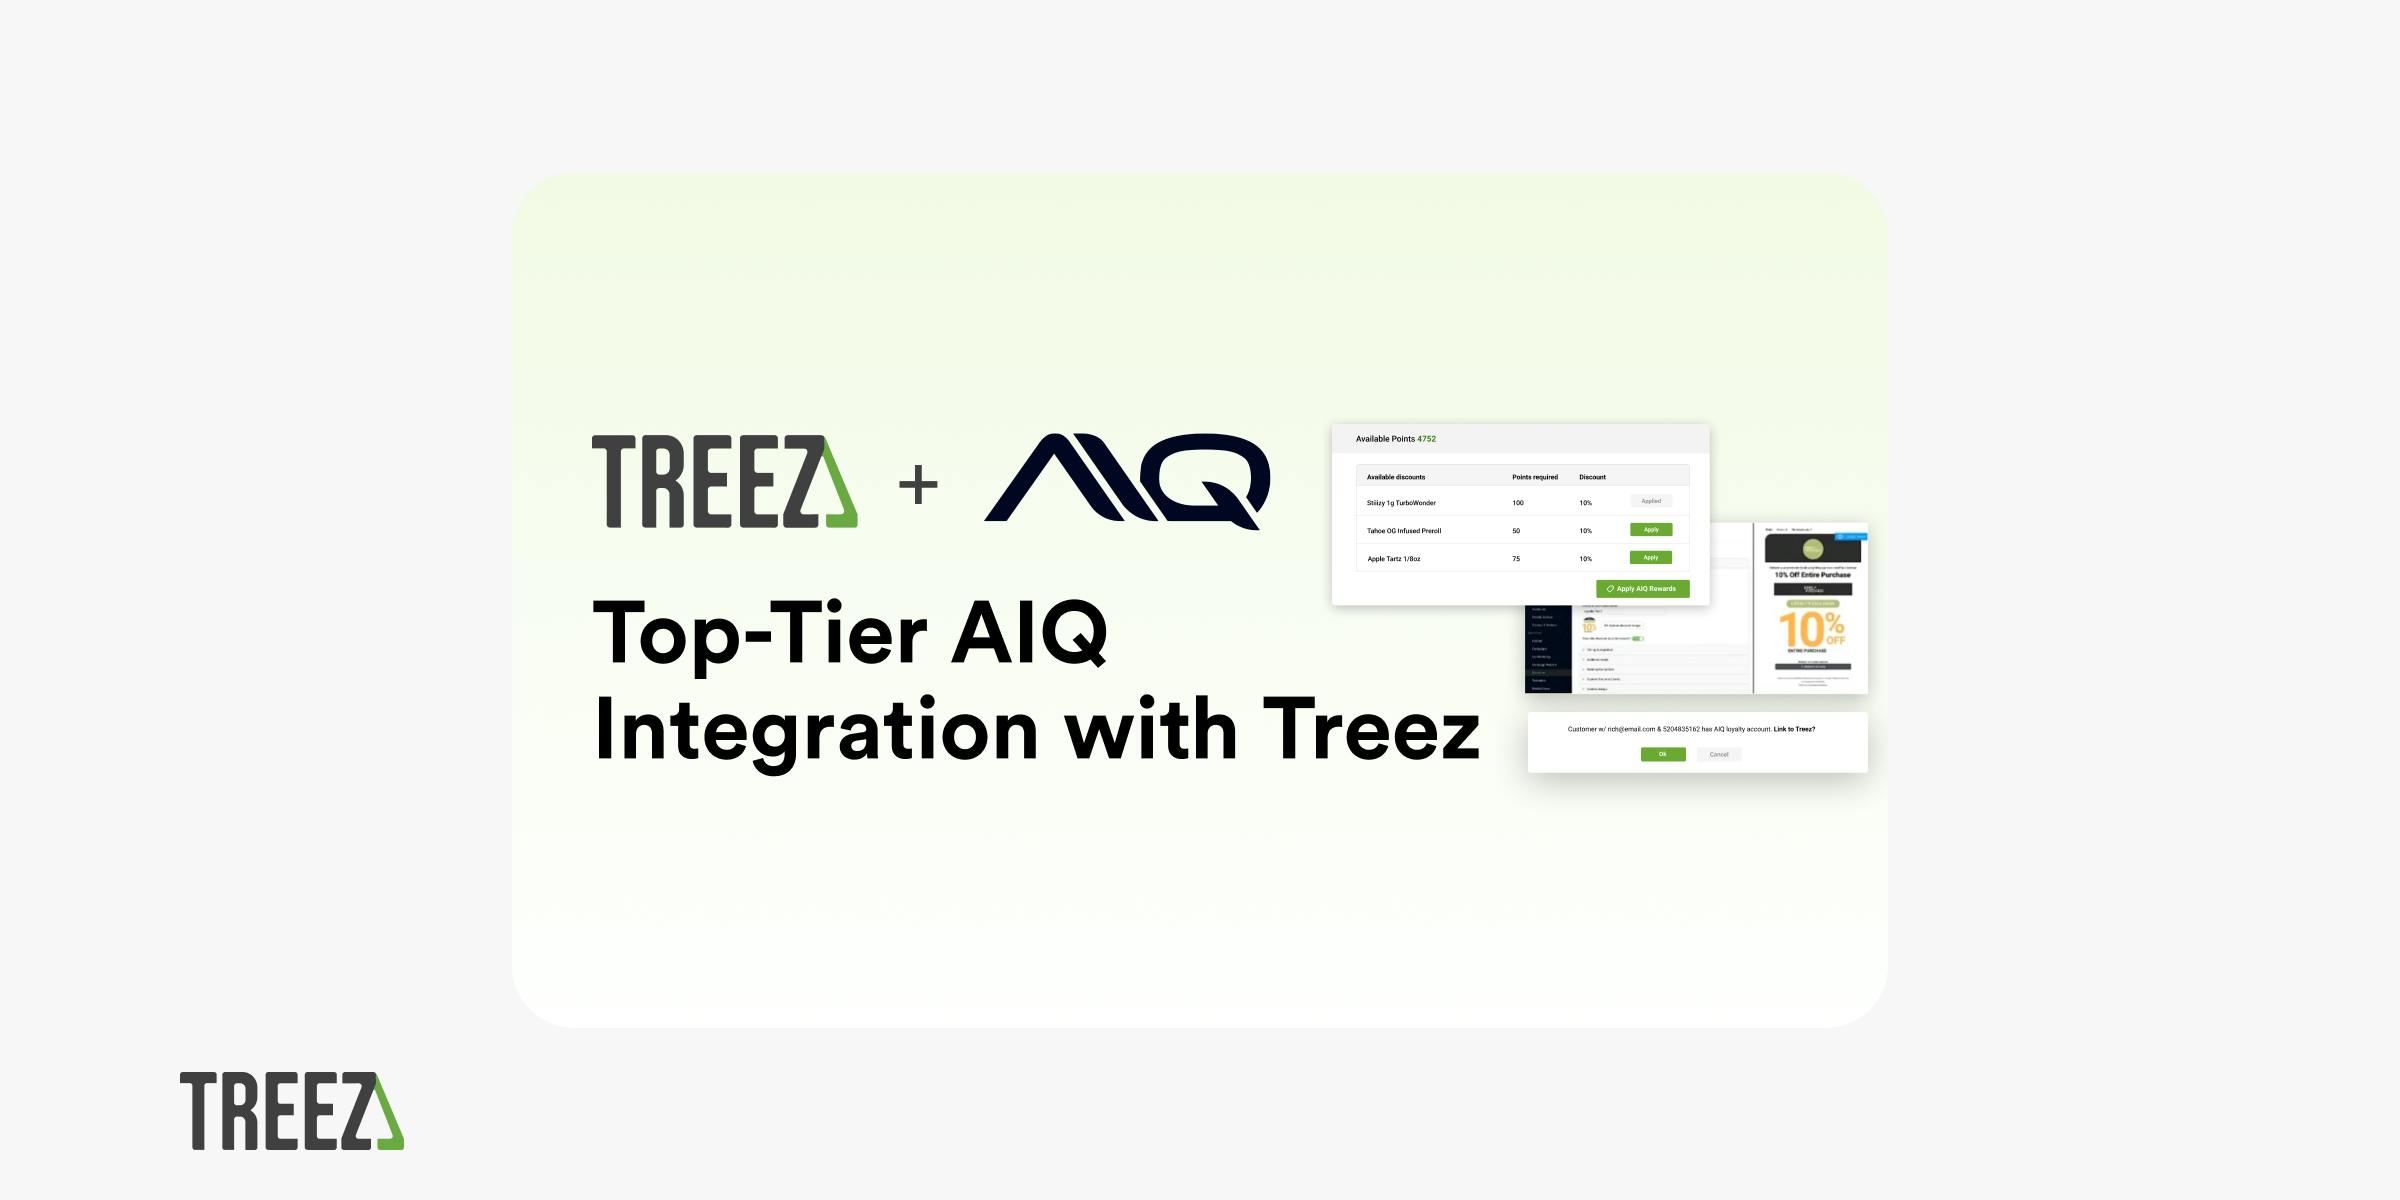 AIQ and Treez logos and screenshots show the top tier integration between Alpine IQ loyalty and Treez point of sale system